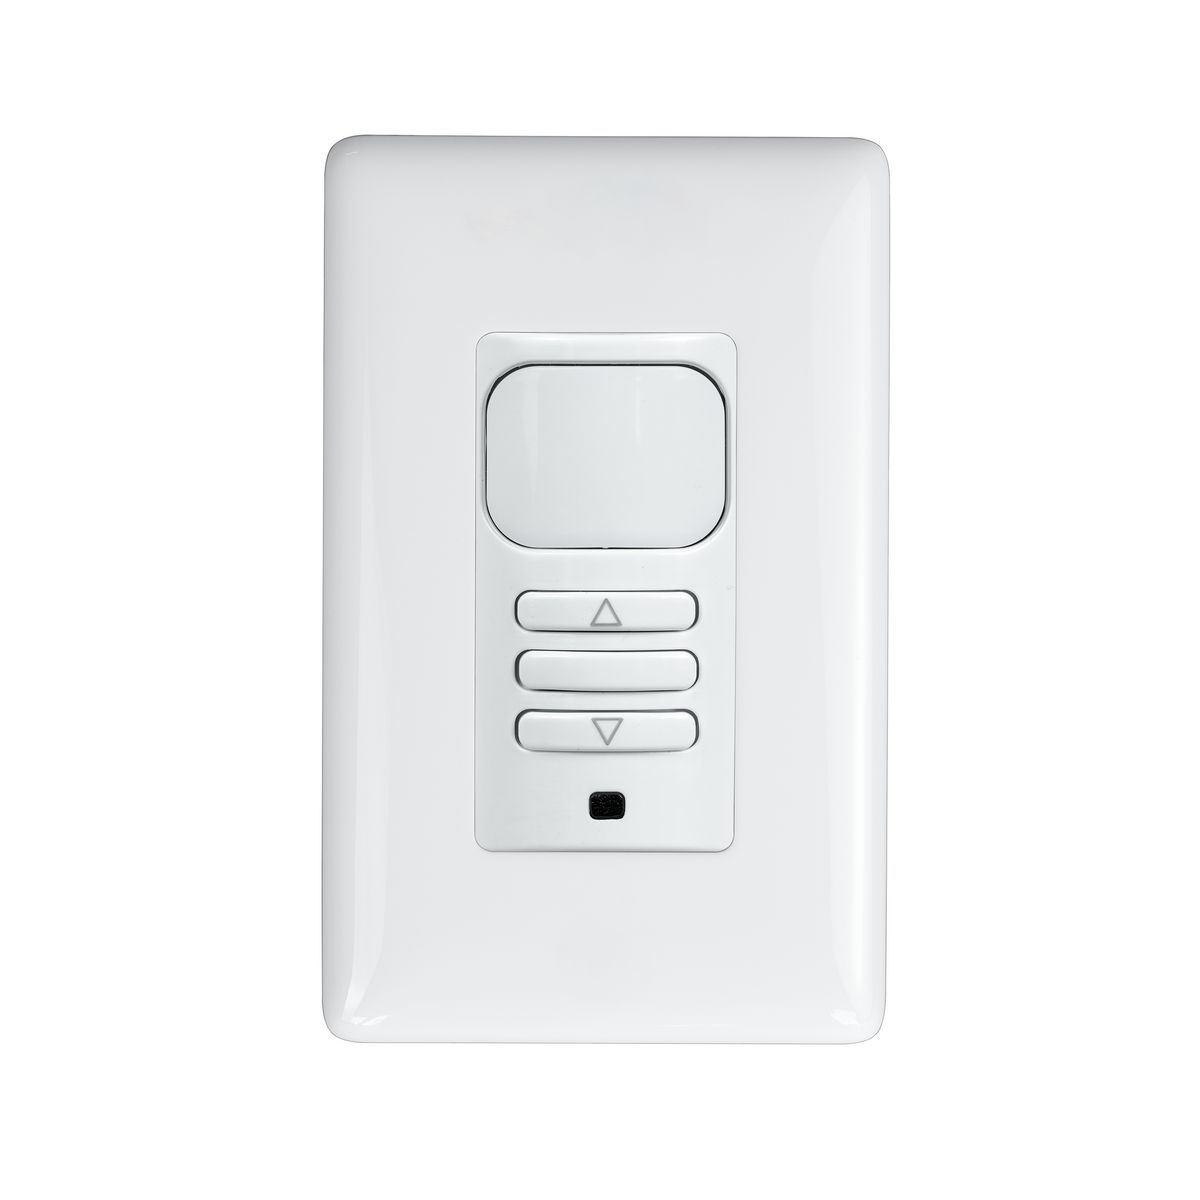 Hubbell LHMTD2-G-WH Dual Tech Wall Vacancy Switch 